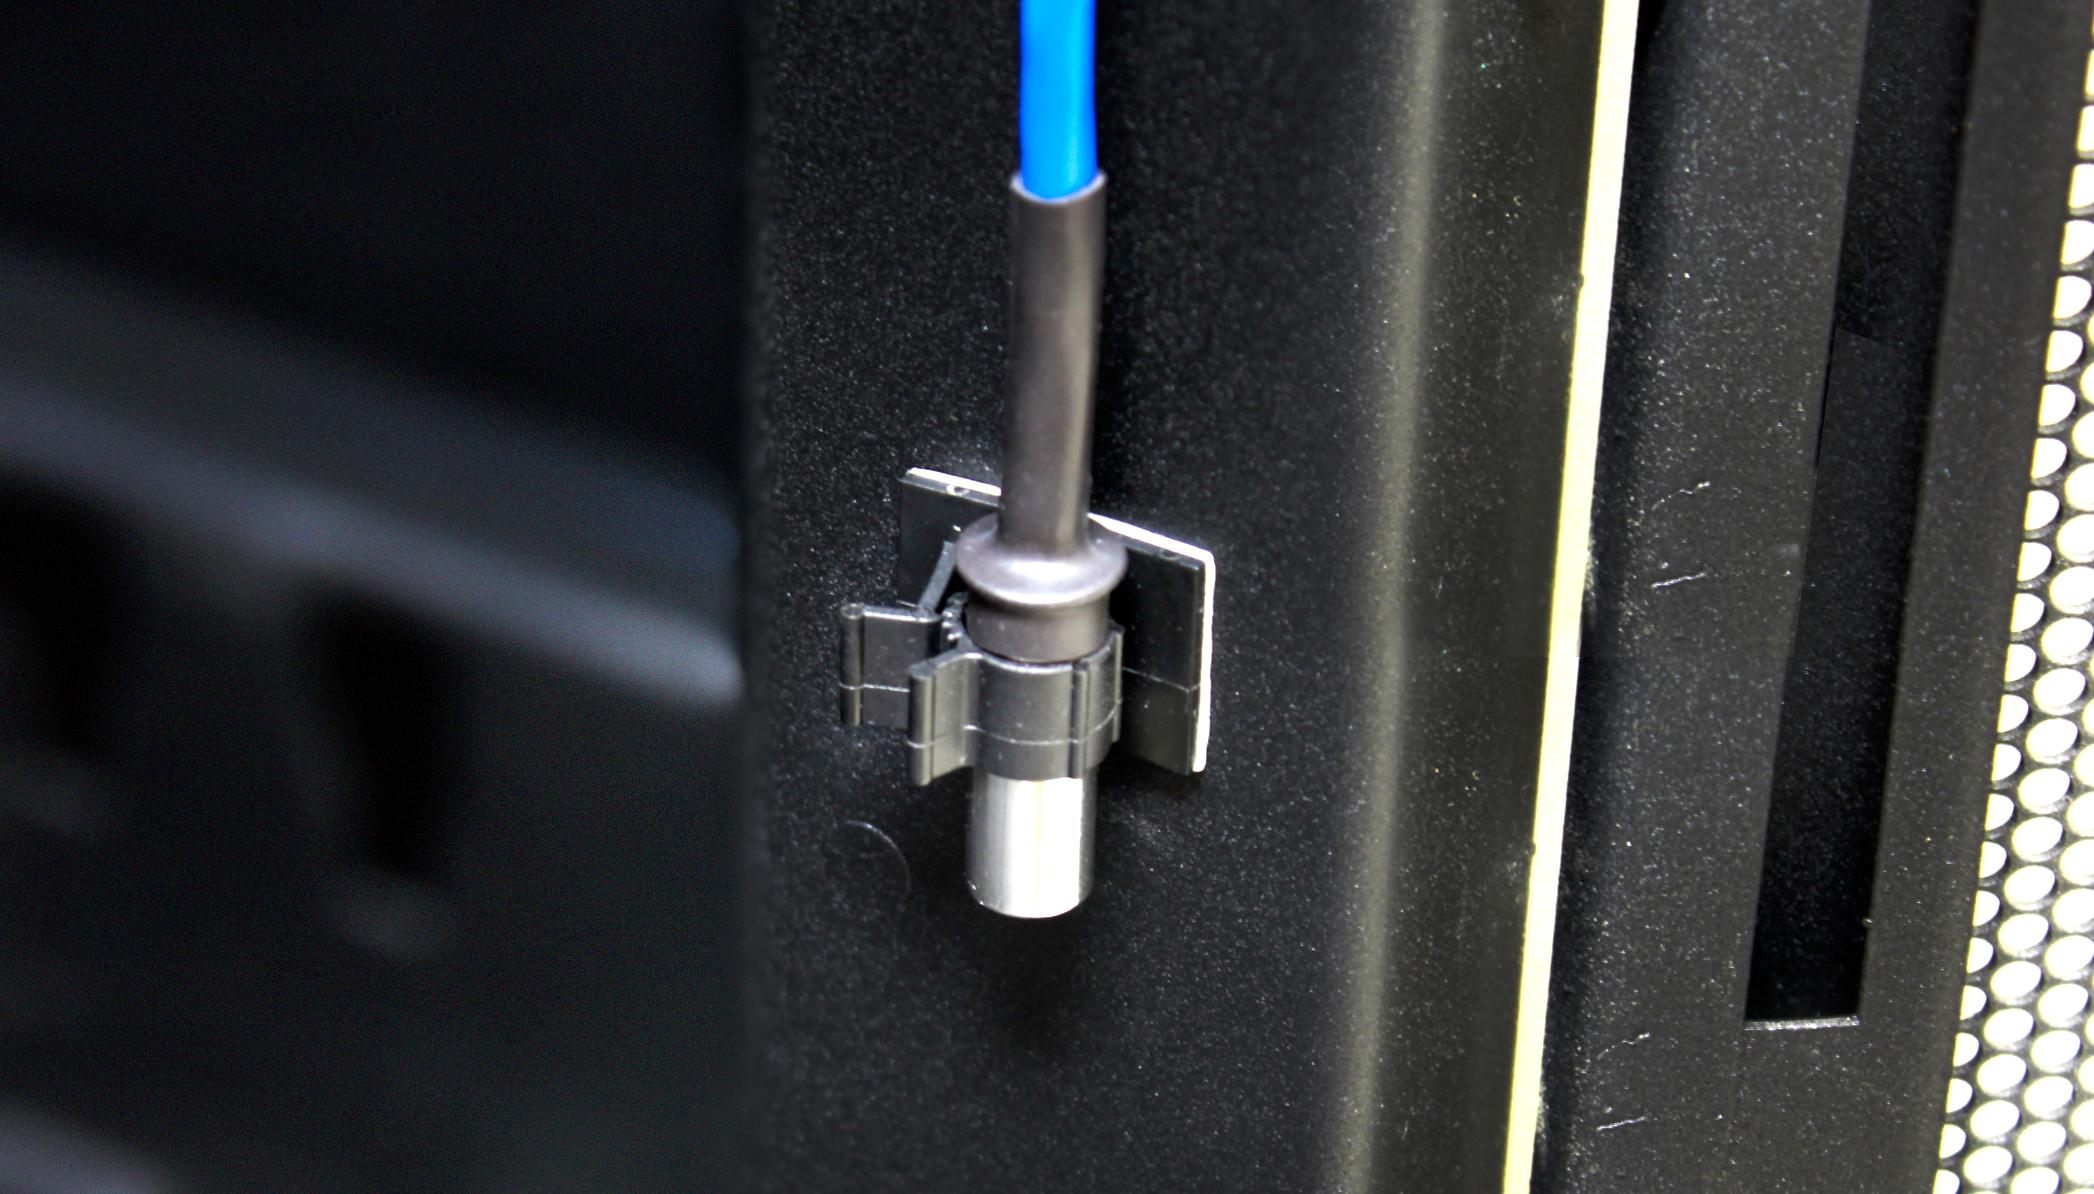 AKCP Temperature Sensors are easily installed using the included free sensor clips.